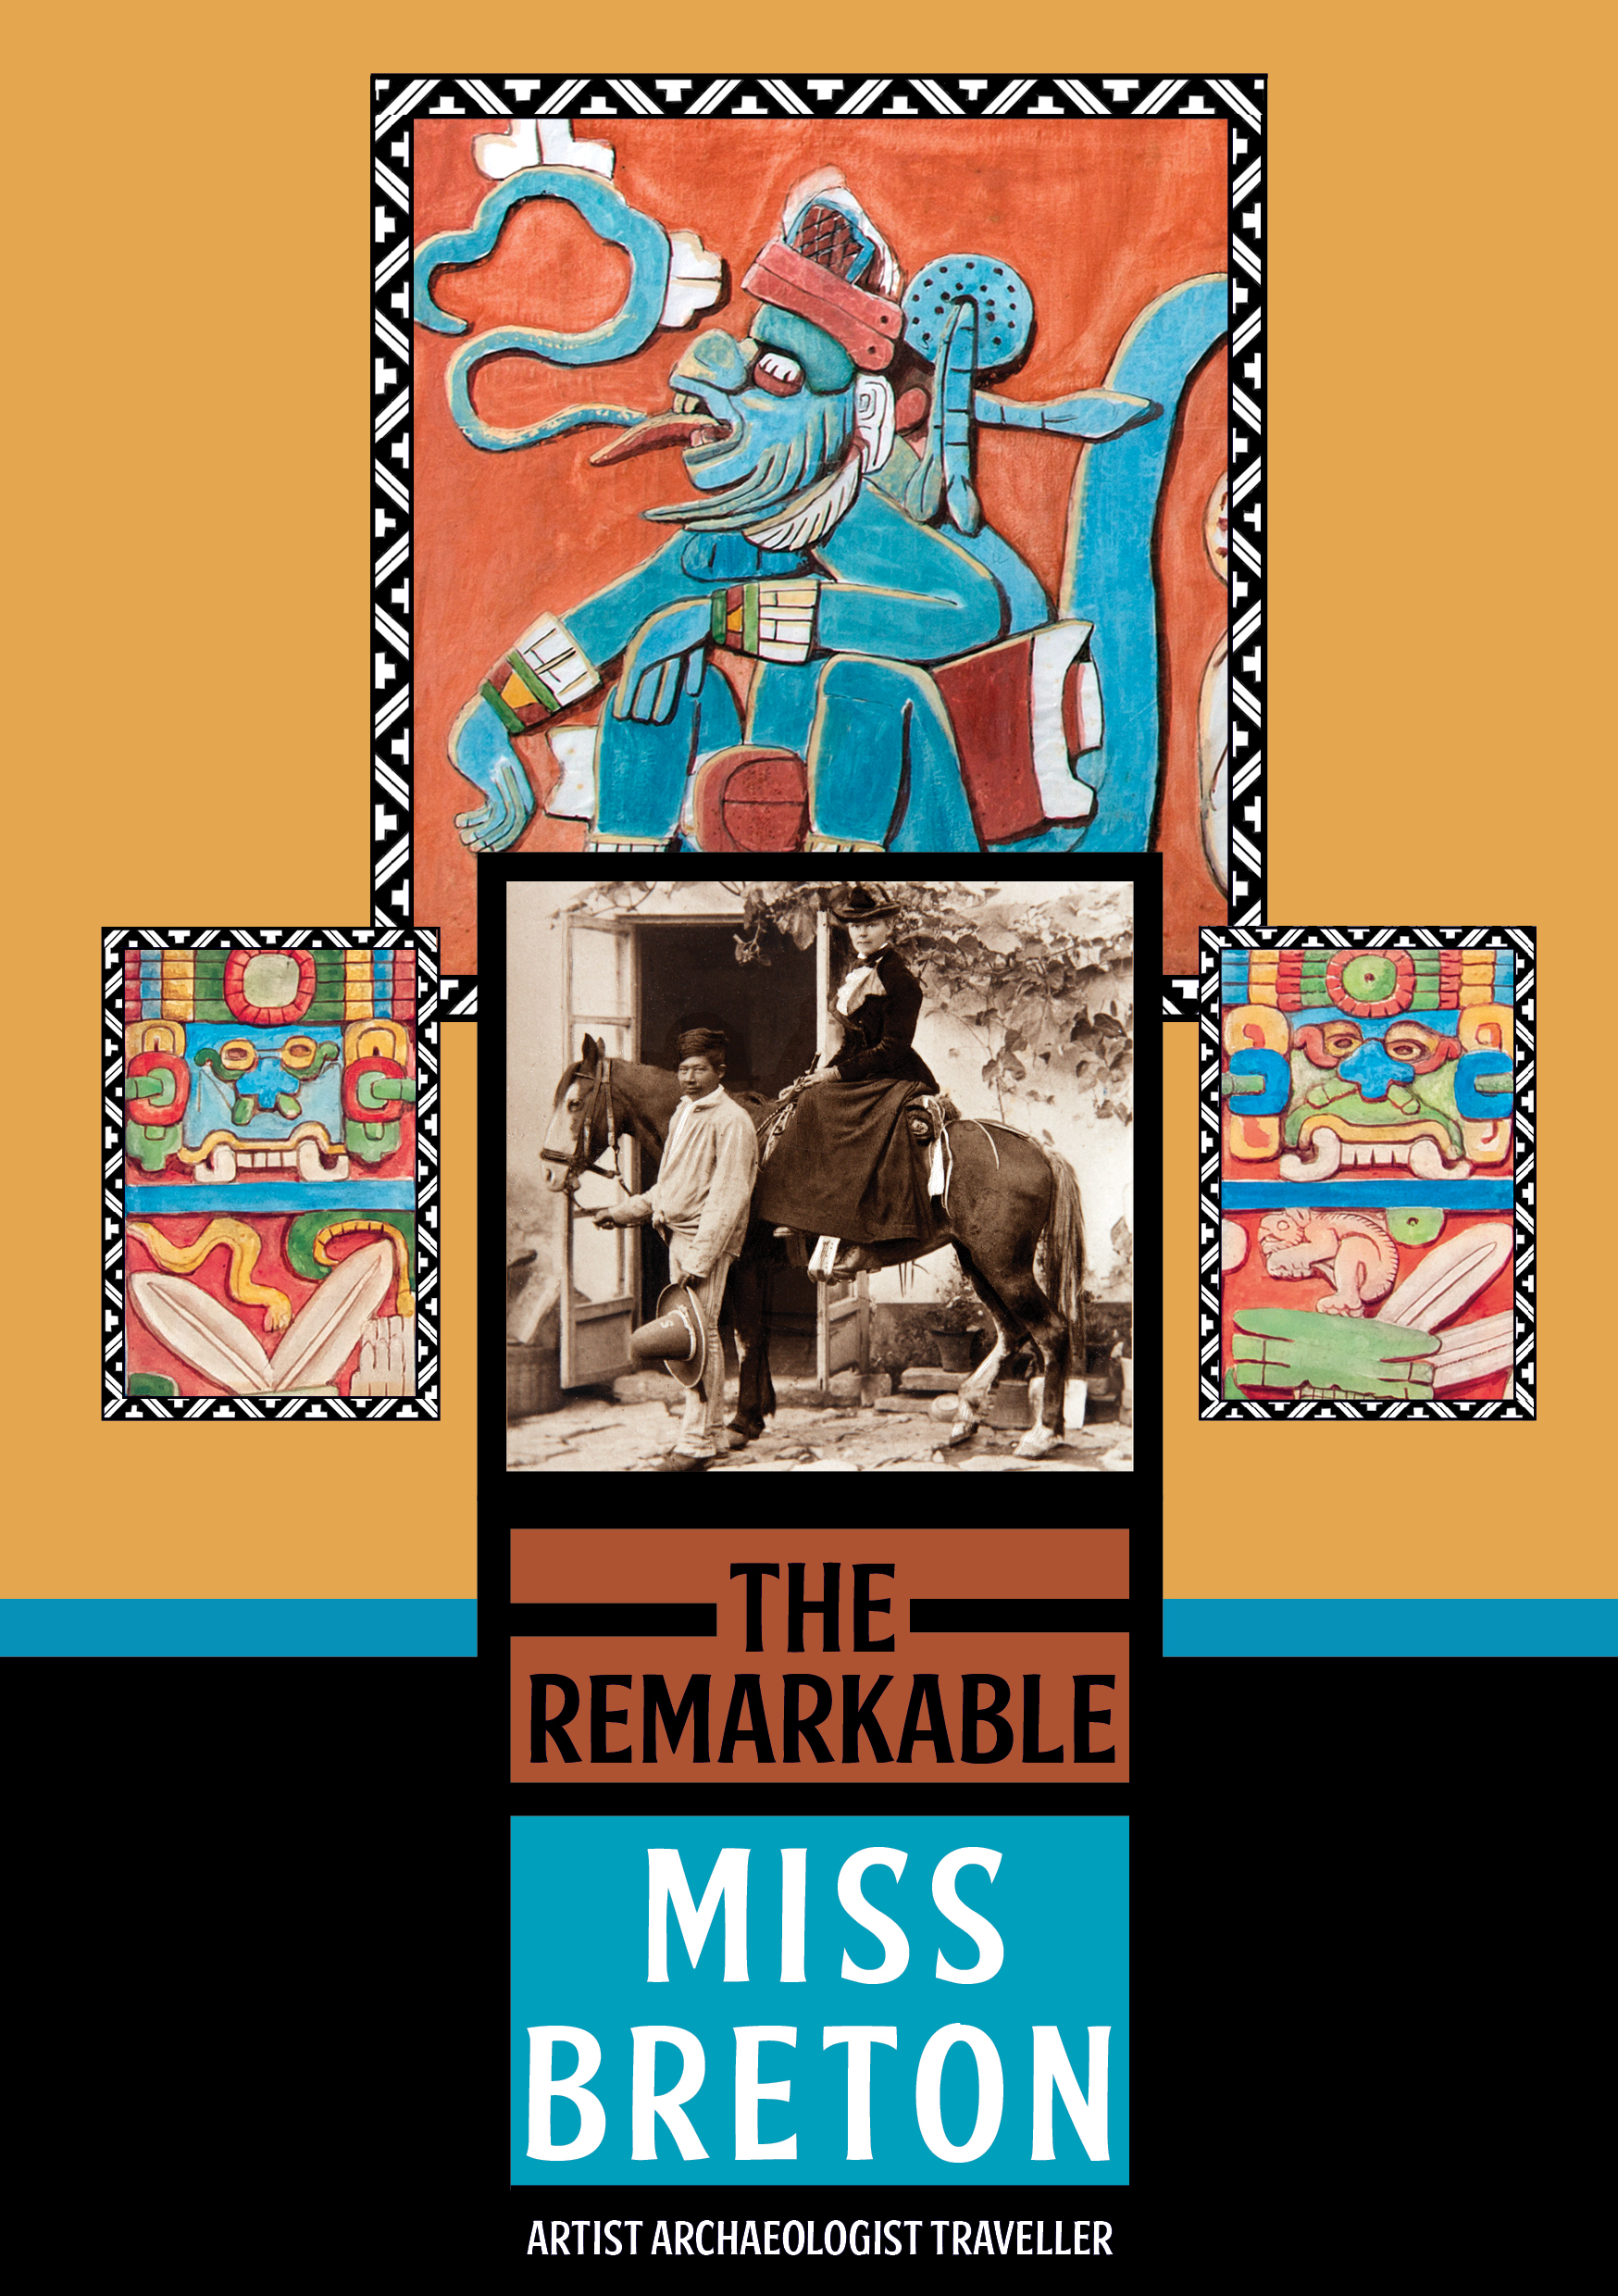 A picture of the front cover of The remarkable miss breton